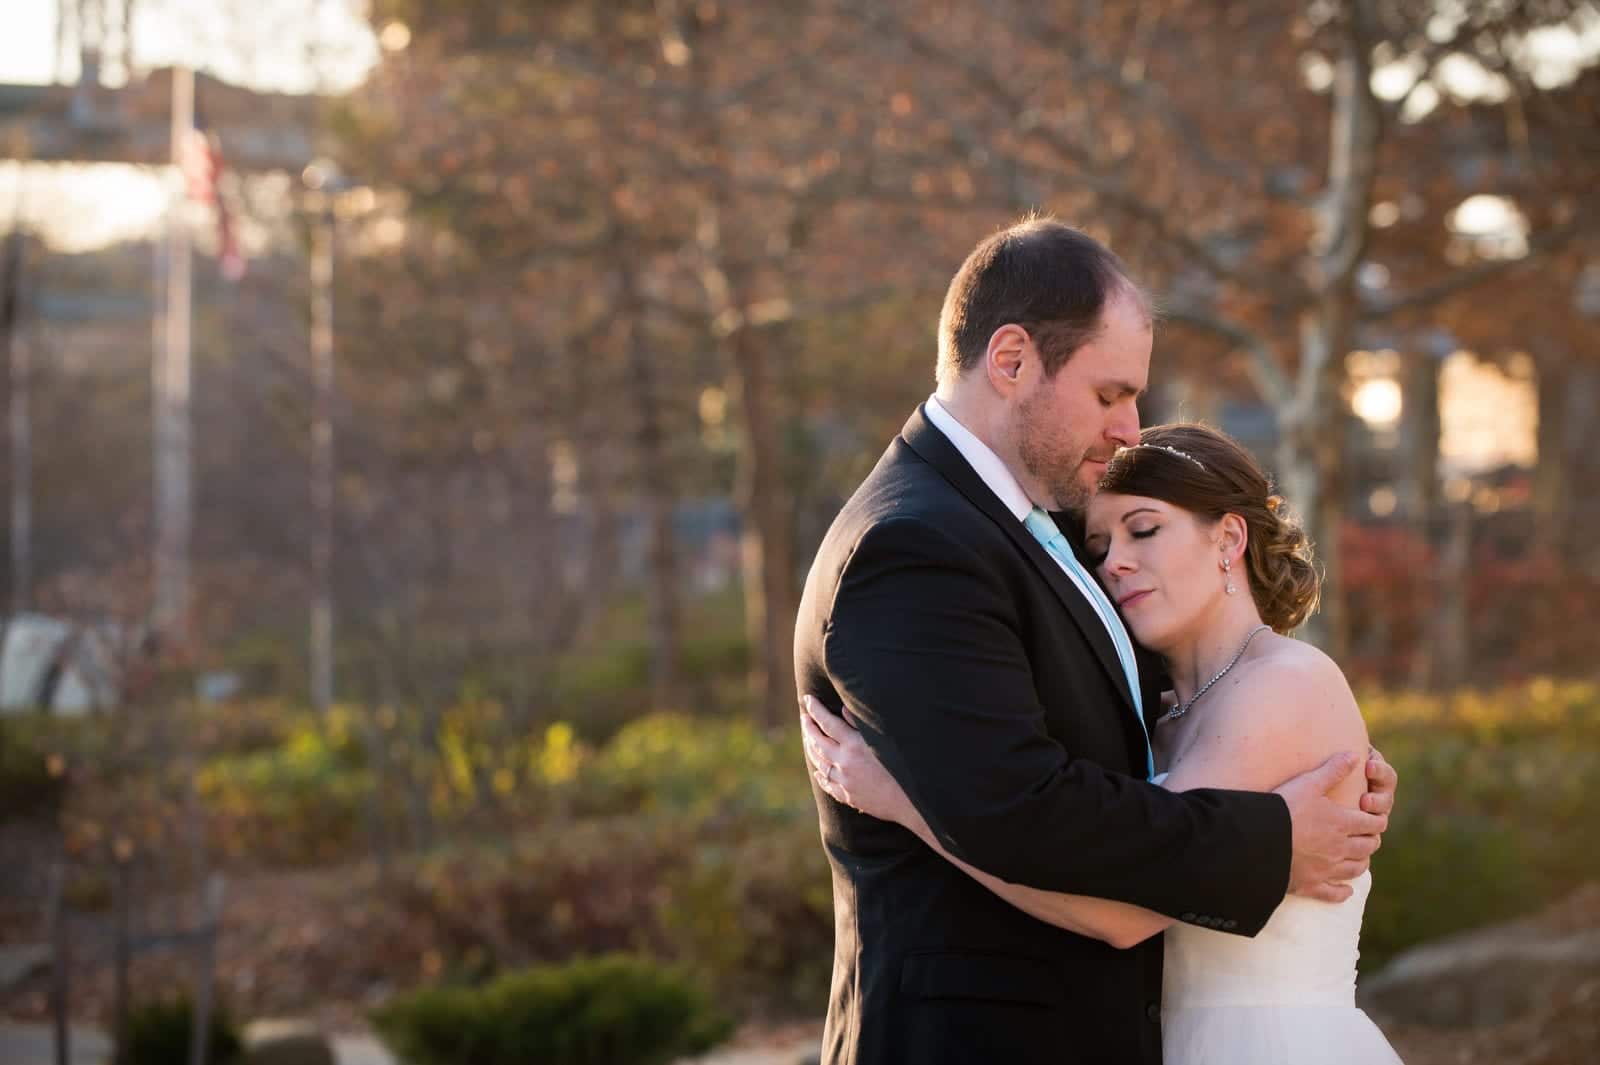 A bride and groom close their eyes and hug with the warm afternoon sunlight behind them.